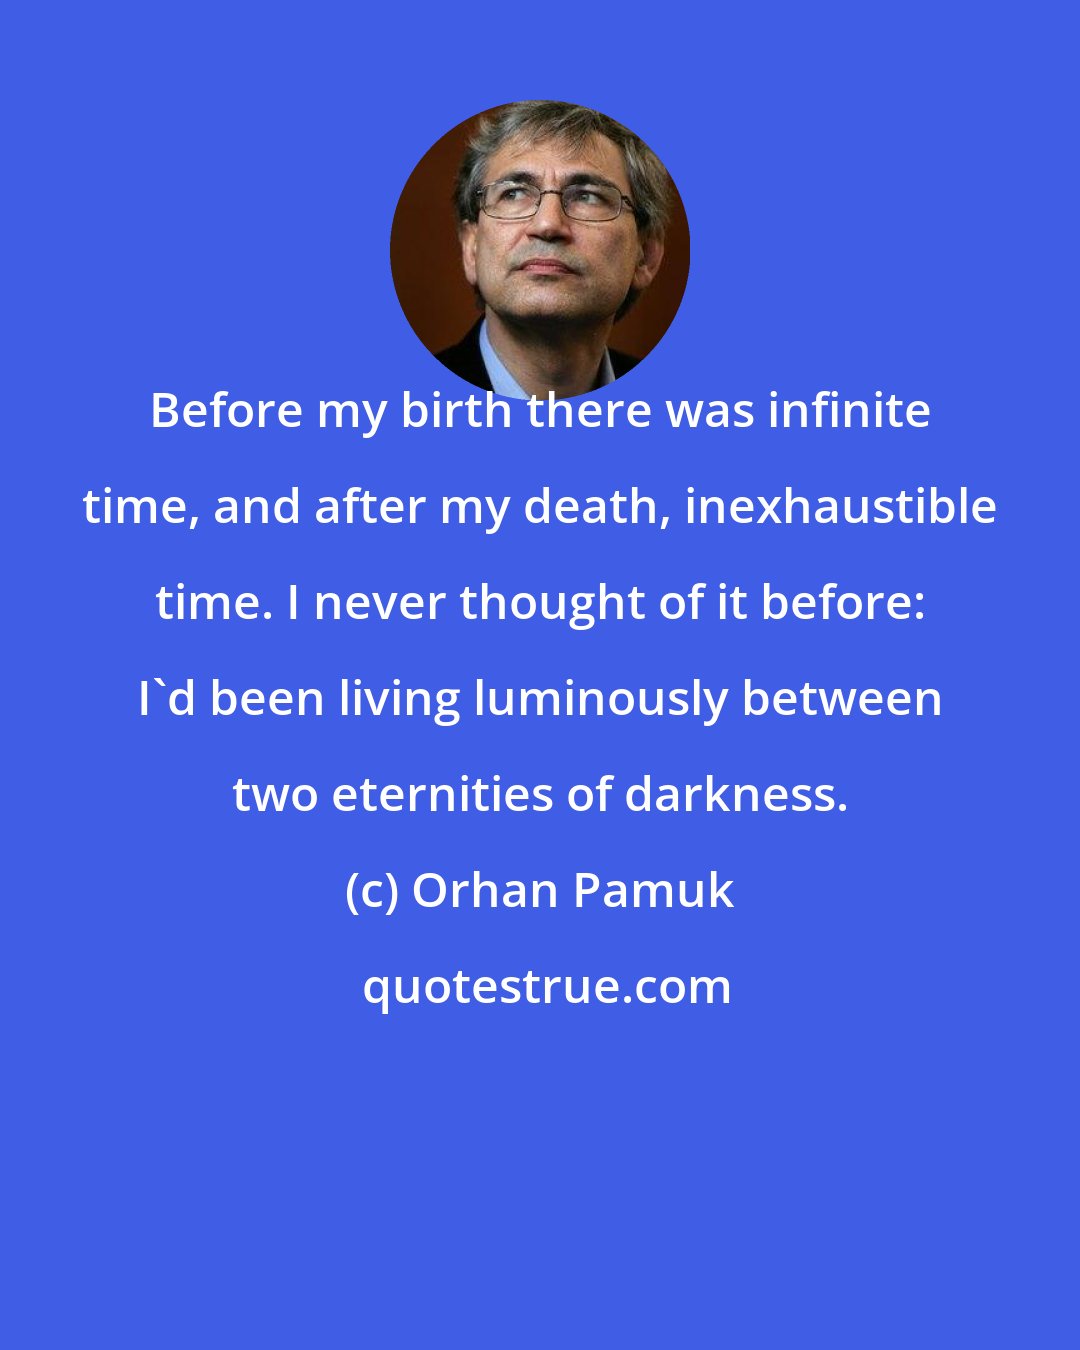 Orhan Pamuk: Before my birth there was infinite time, and after my death, inexhaustible time. I never thought of it before: I'd been living luminously between two eternities of darkness.